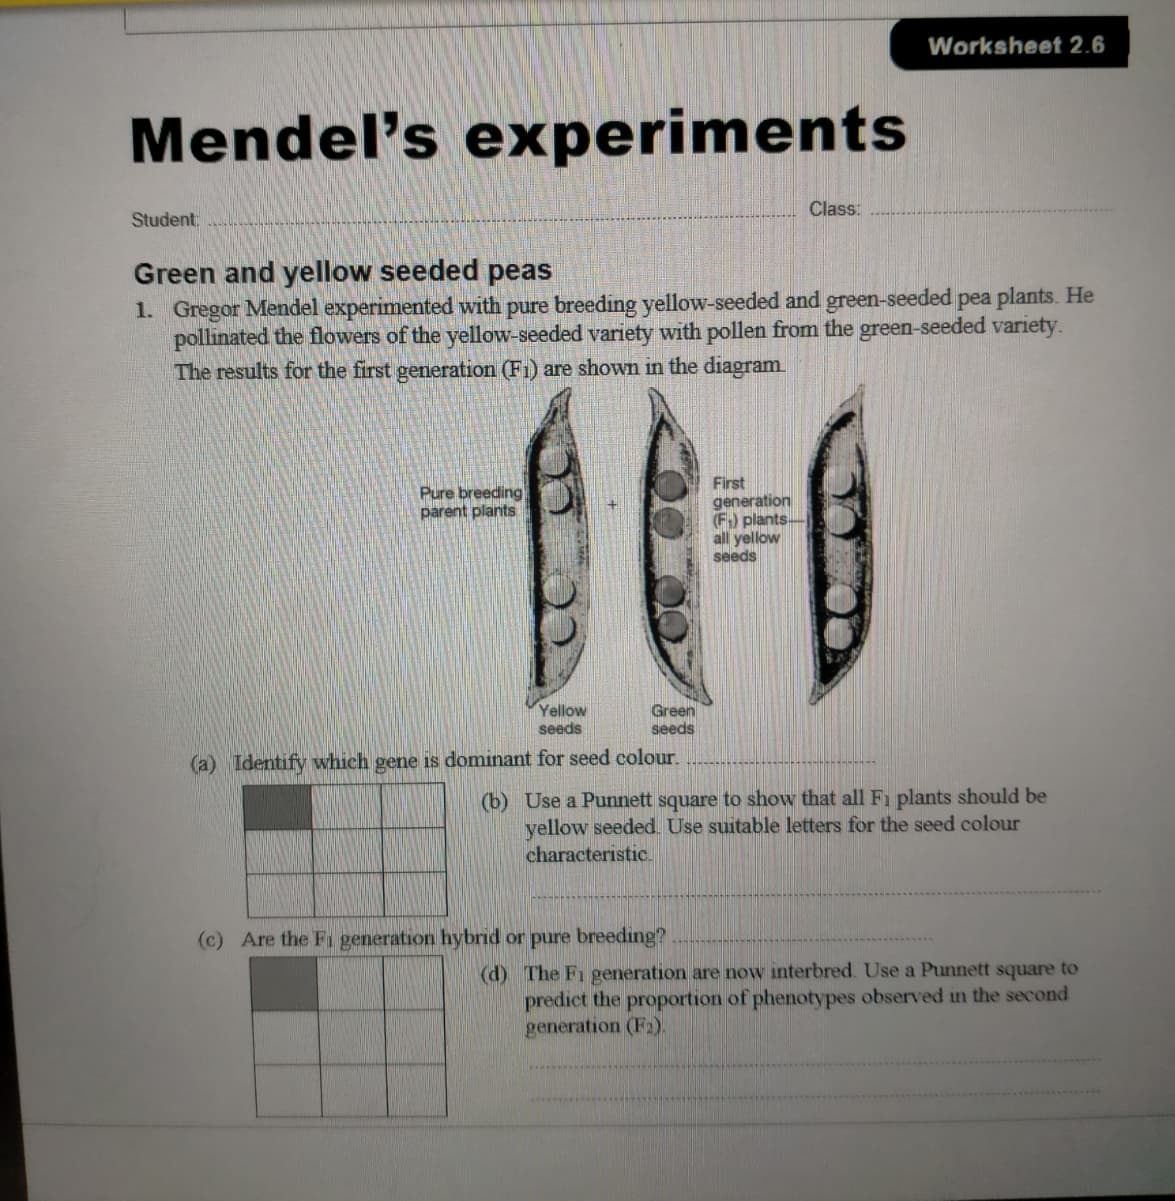 Worksheet 2.6
Mendel's experiments
Class:
Student
Green and yellow seeded peas
1. Gregor Mendel experimented with pure breeding yellow-seeded and green-seeded pea plants. He
pollinated the flowers of the yellow-seeded variety with pollen from the green-seeded variety.
The results for the first generation (F1) are shown in the diagram
First
generation
(F) plants
all yellow
seeds
Pure breeding
parent plants
Yellow
seeds
Green
seeds
(a) Identify which gene is dominant for seed colour.
(b) Use a Punnett square to show that all Fı plants should be
yellow seeded. Use suitable letters for the seed colour
characteristic.
(c) Are the Fi generation hybrid or pure breeding?
(d) The Fi generation are now interbred. Use a Punnett square to
predict the proportion of phenotypes observed in the second
generation (F2).
